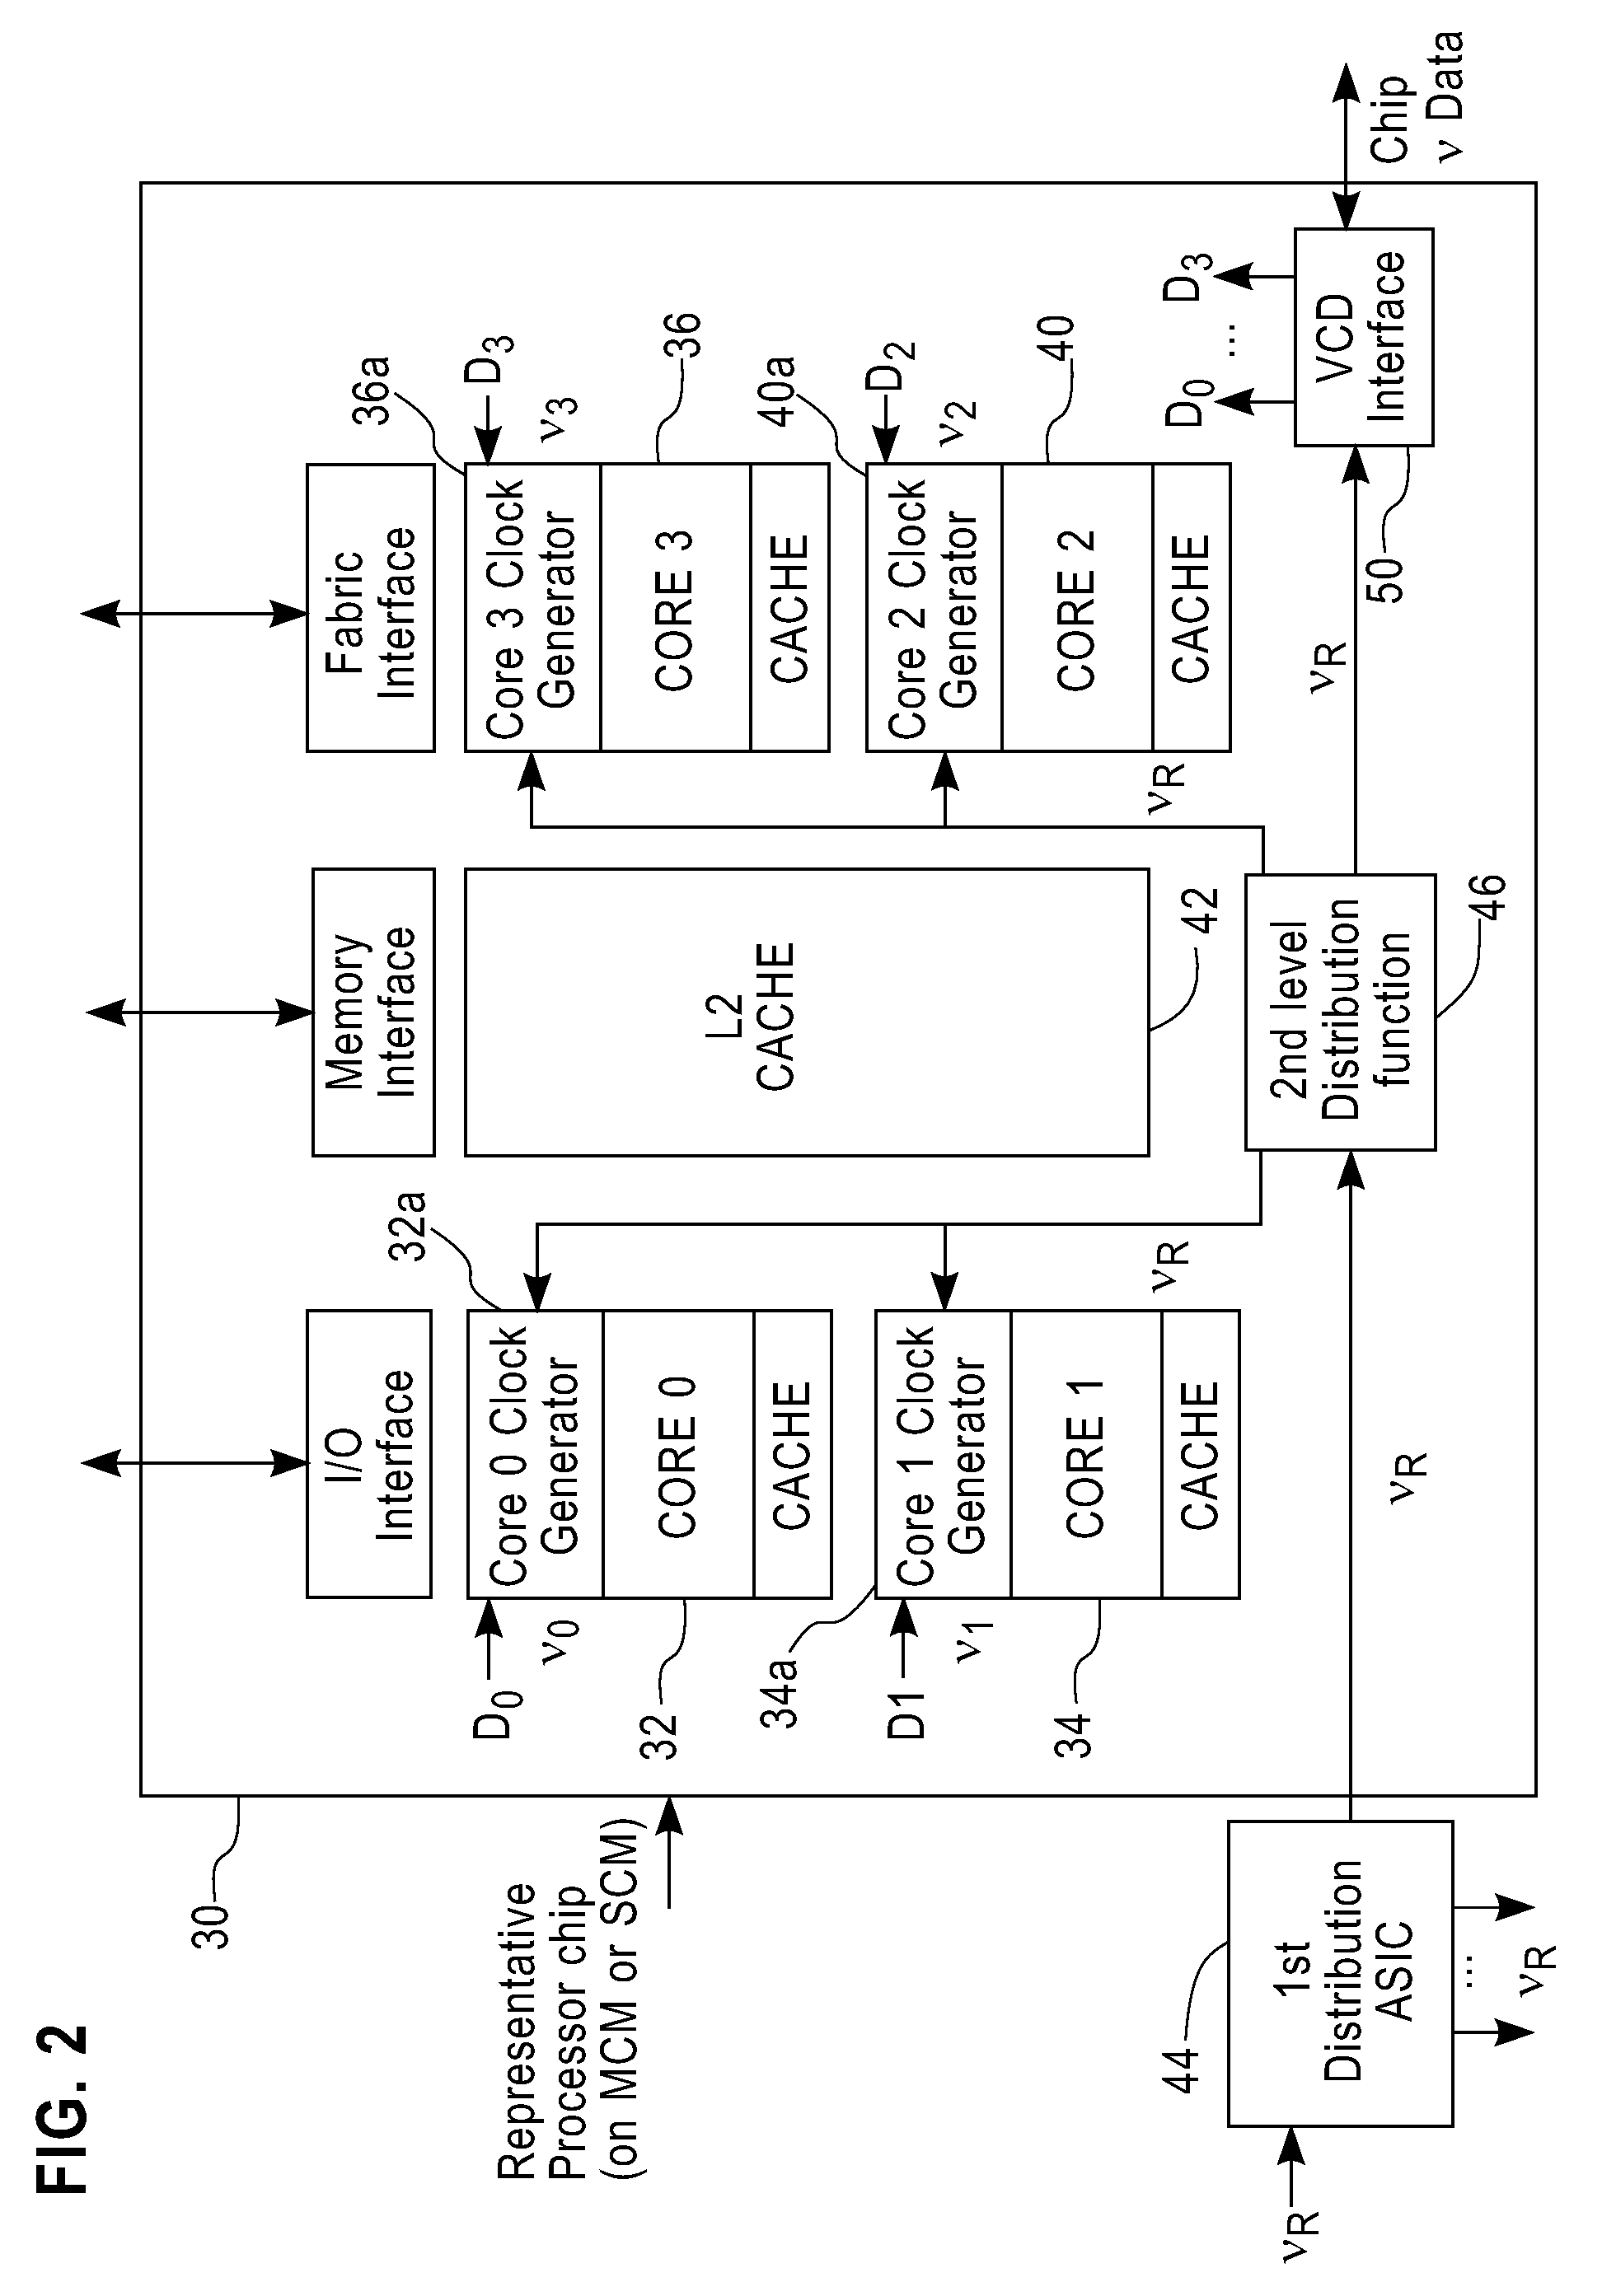 Method and system for digital frequency clocking in processor cores